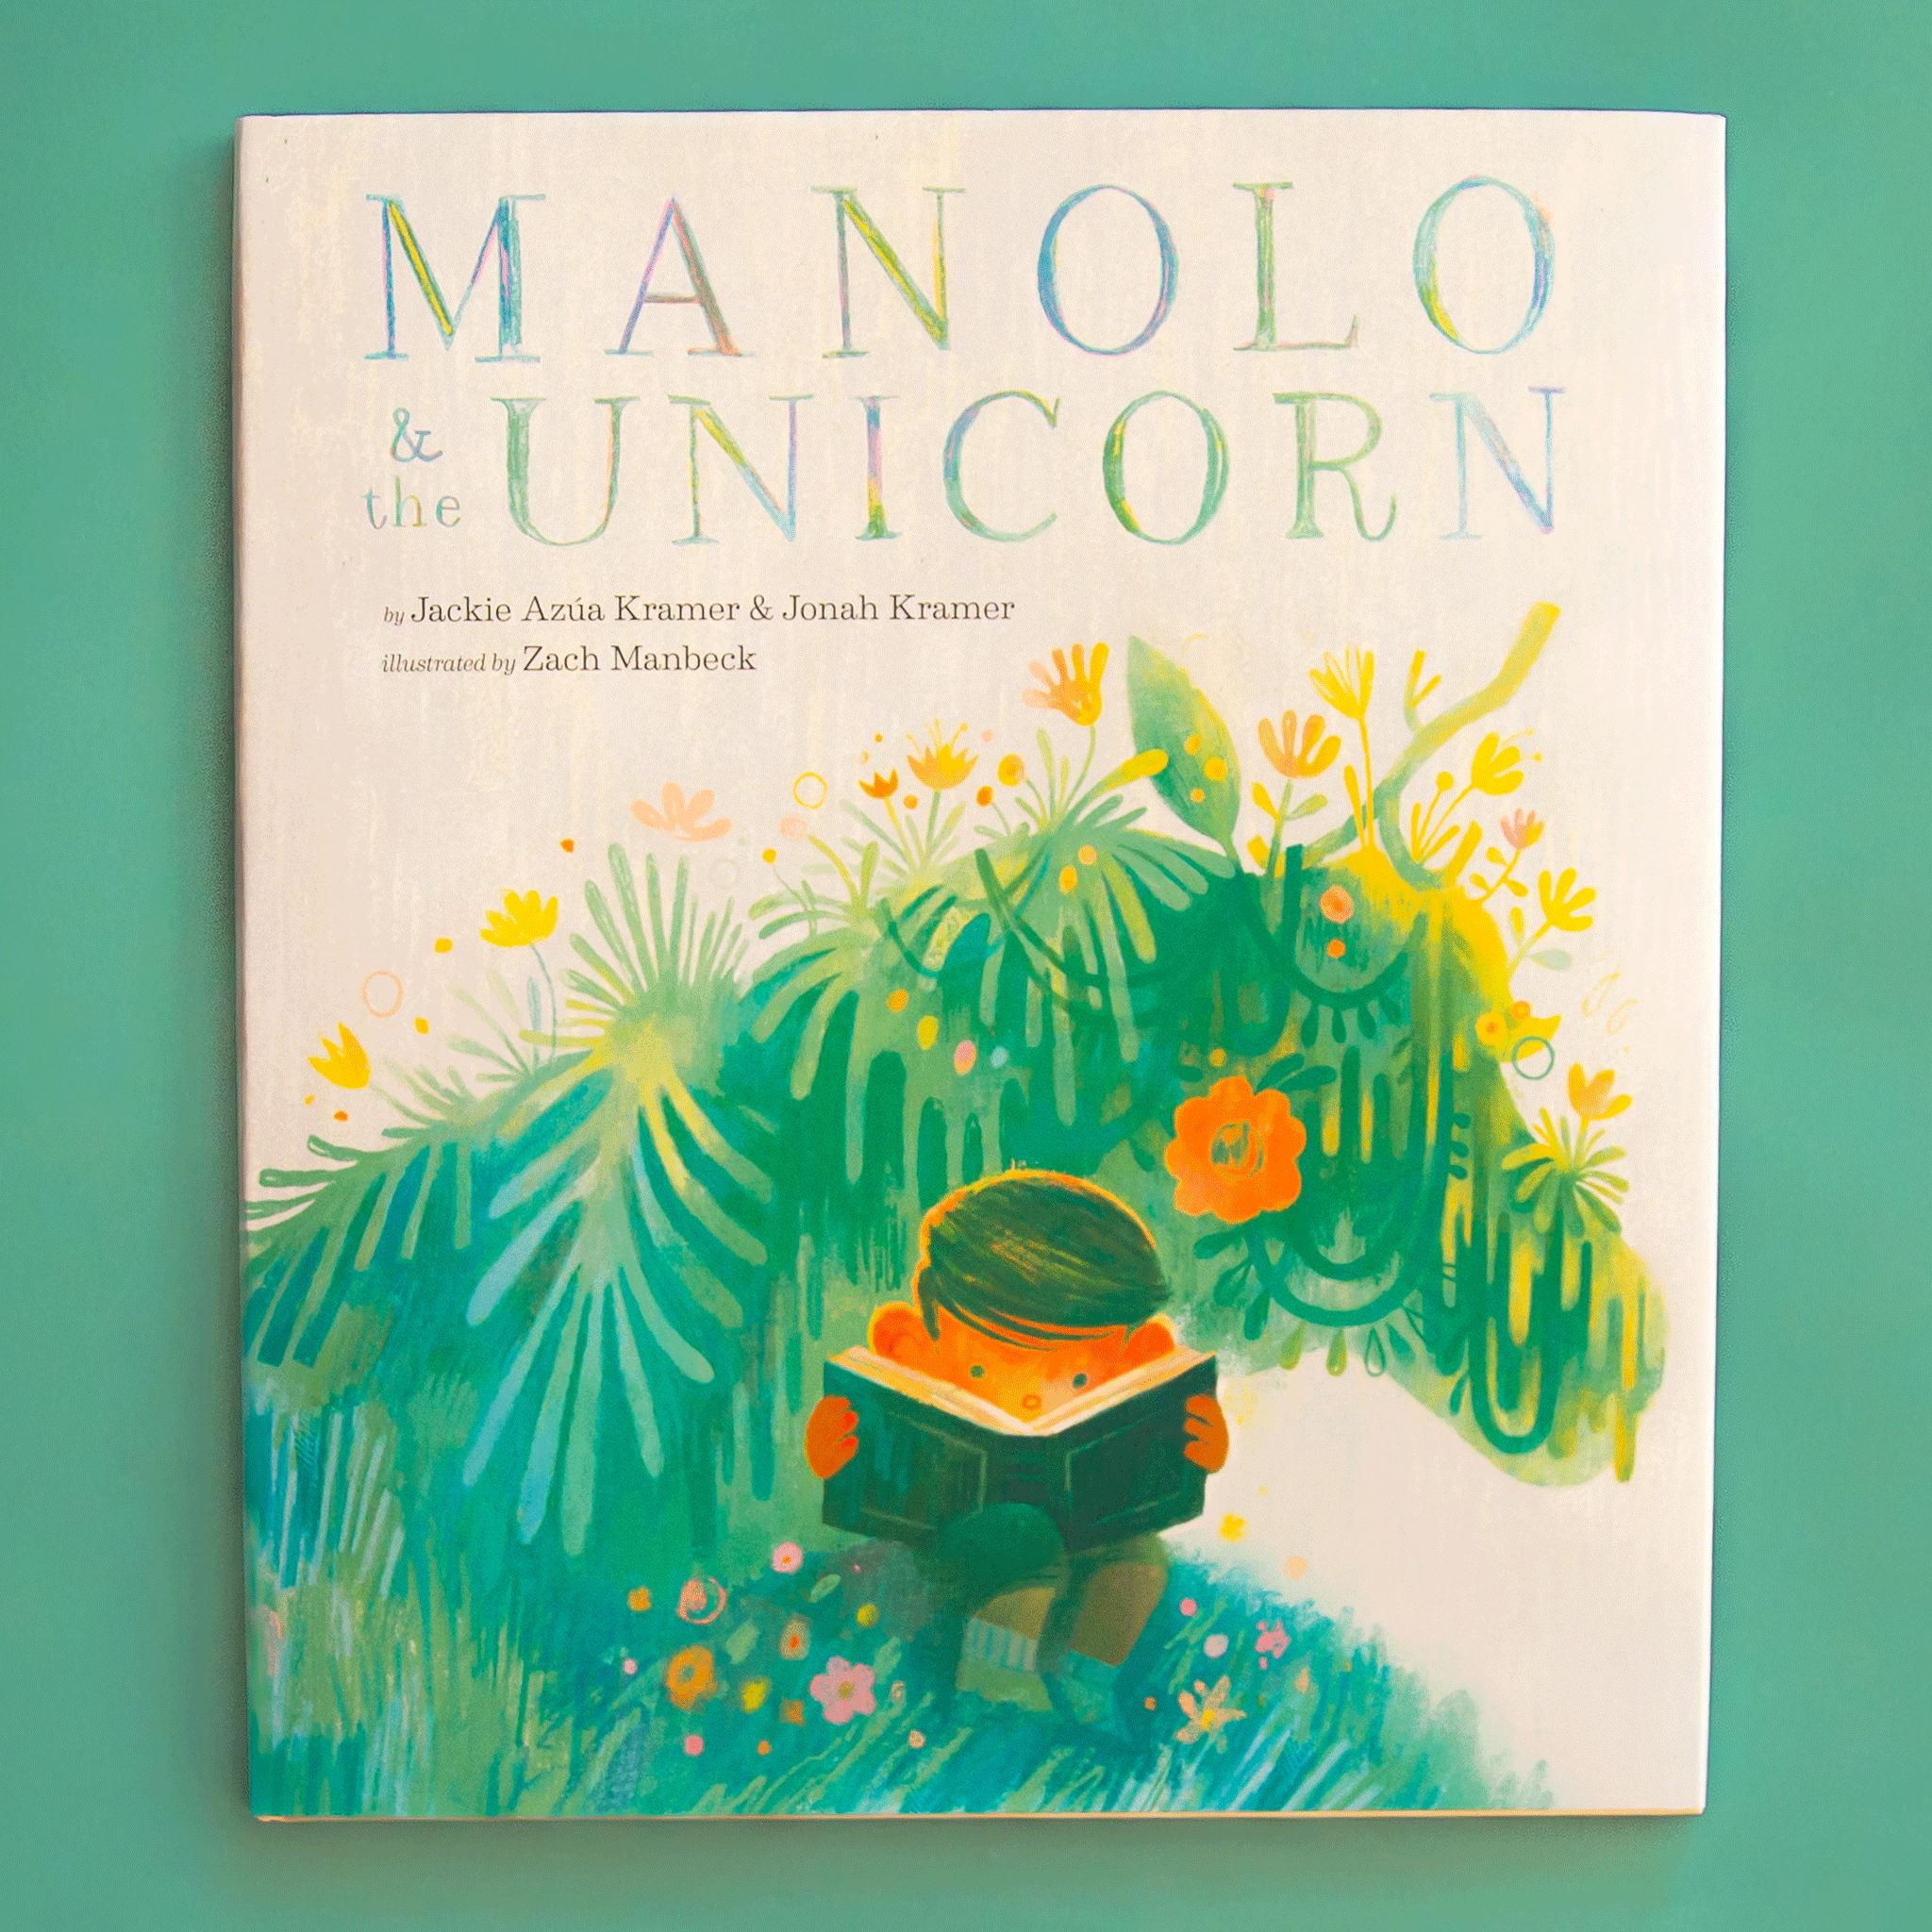 On a green background is a children's book with a title that reads, "Manolo & the Unicorn" with a graphic of a child reading a book with a unicorn shaped greenery behind him. 